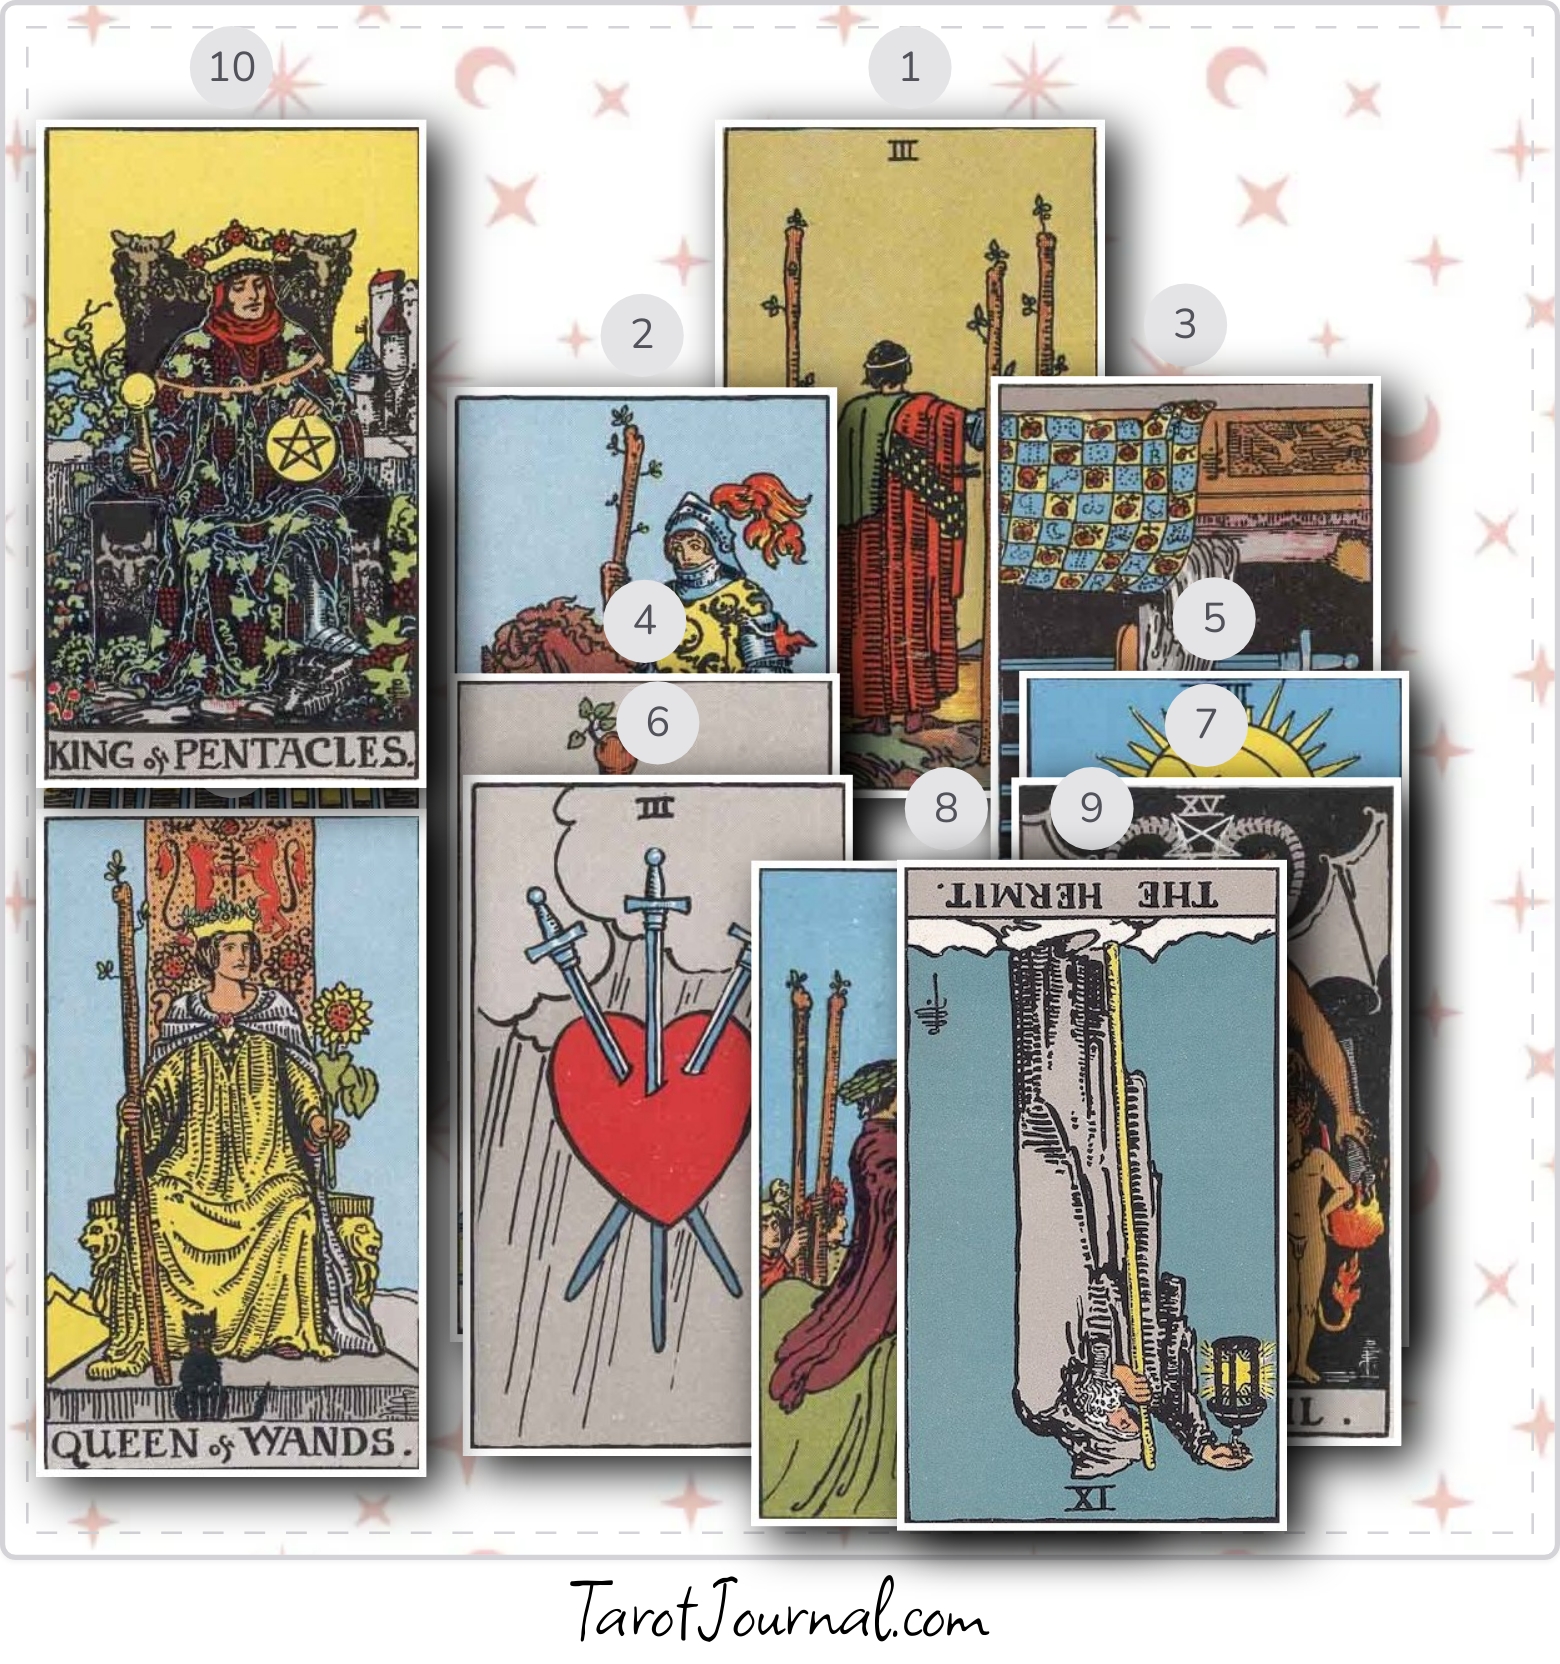 Can I trust my partner means what he says? Has he been respectful to me as his partner when I'm not around? How does he really feel for me? - tarot reading by Tiffany